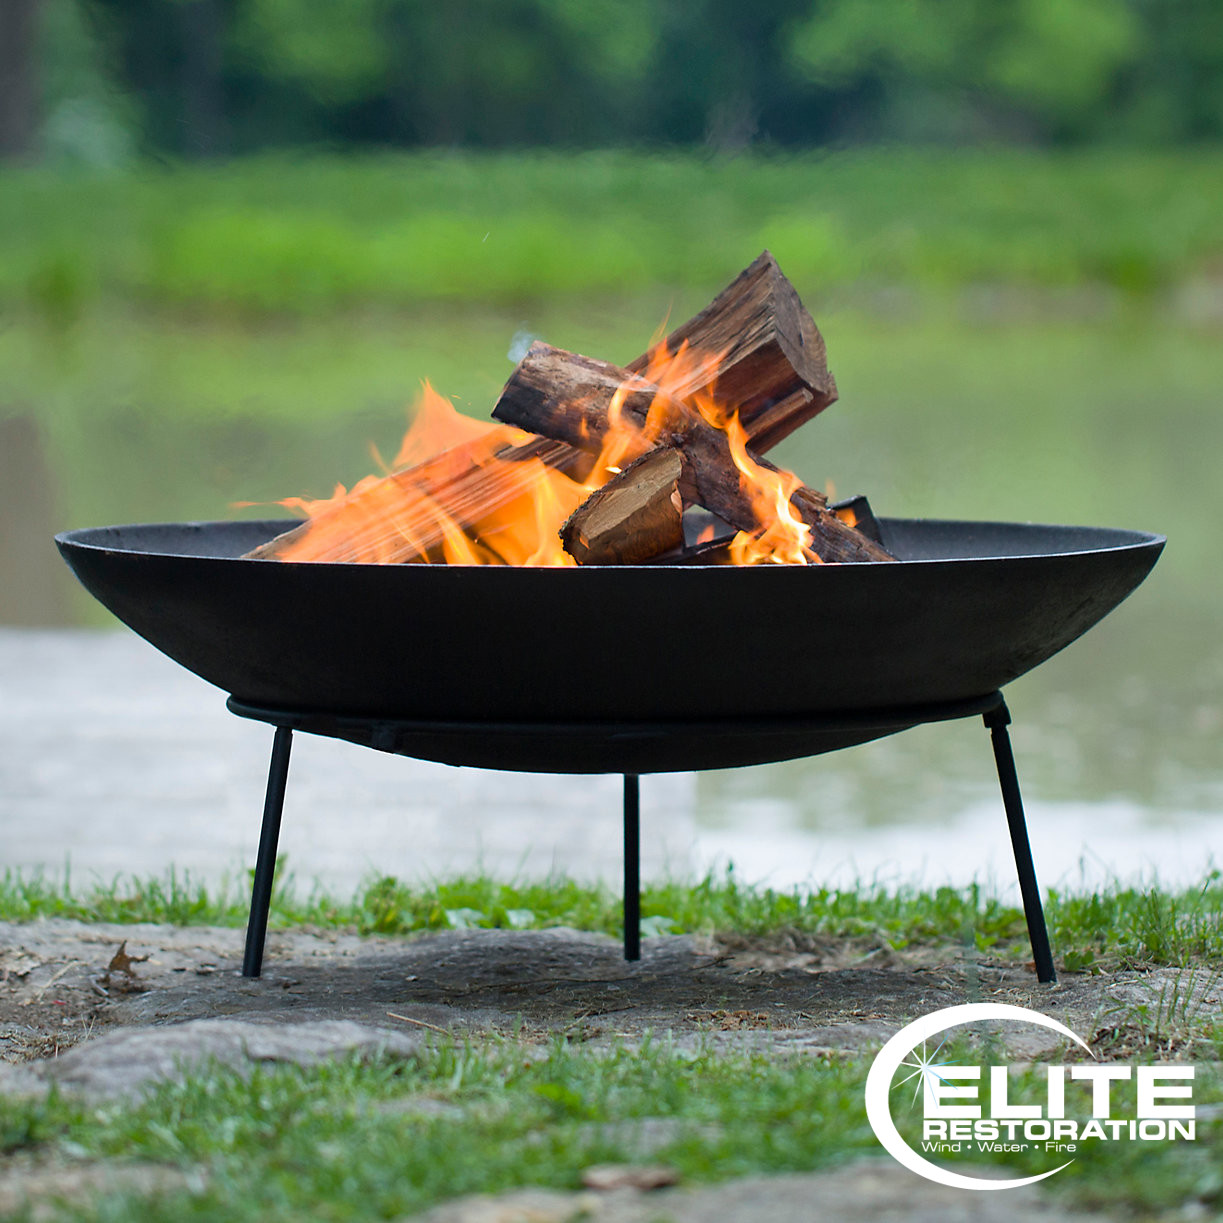 Featured image for “Backyard Fire Pit Safety Tips”